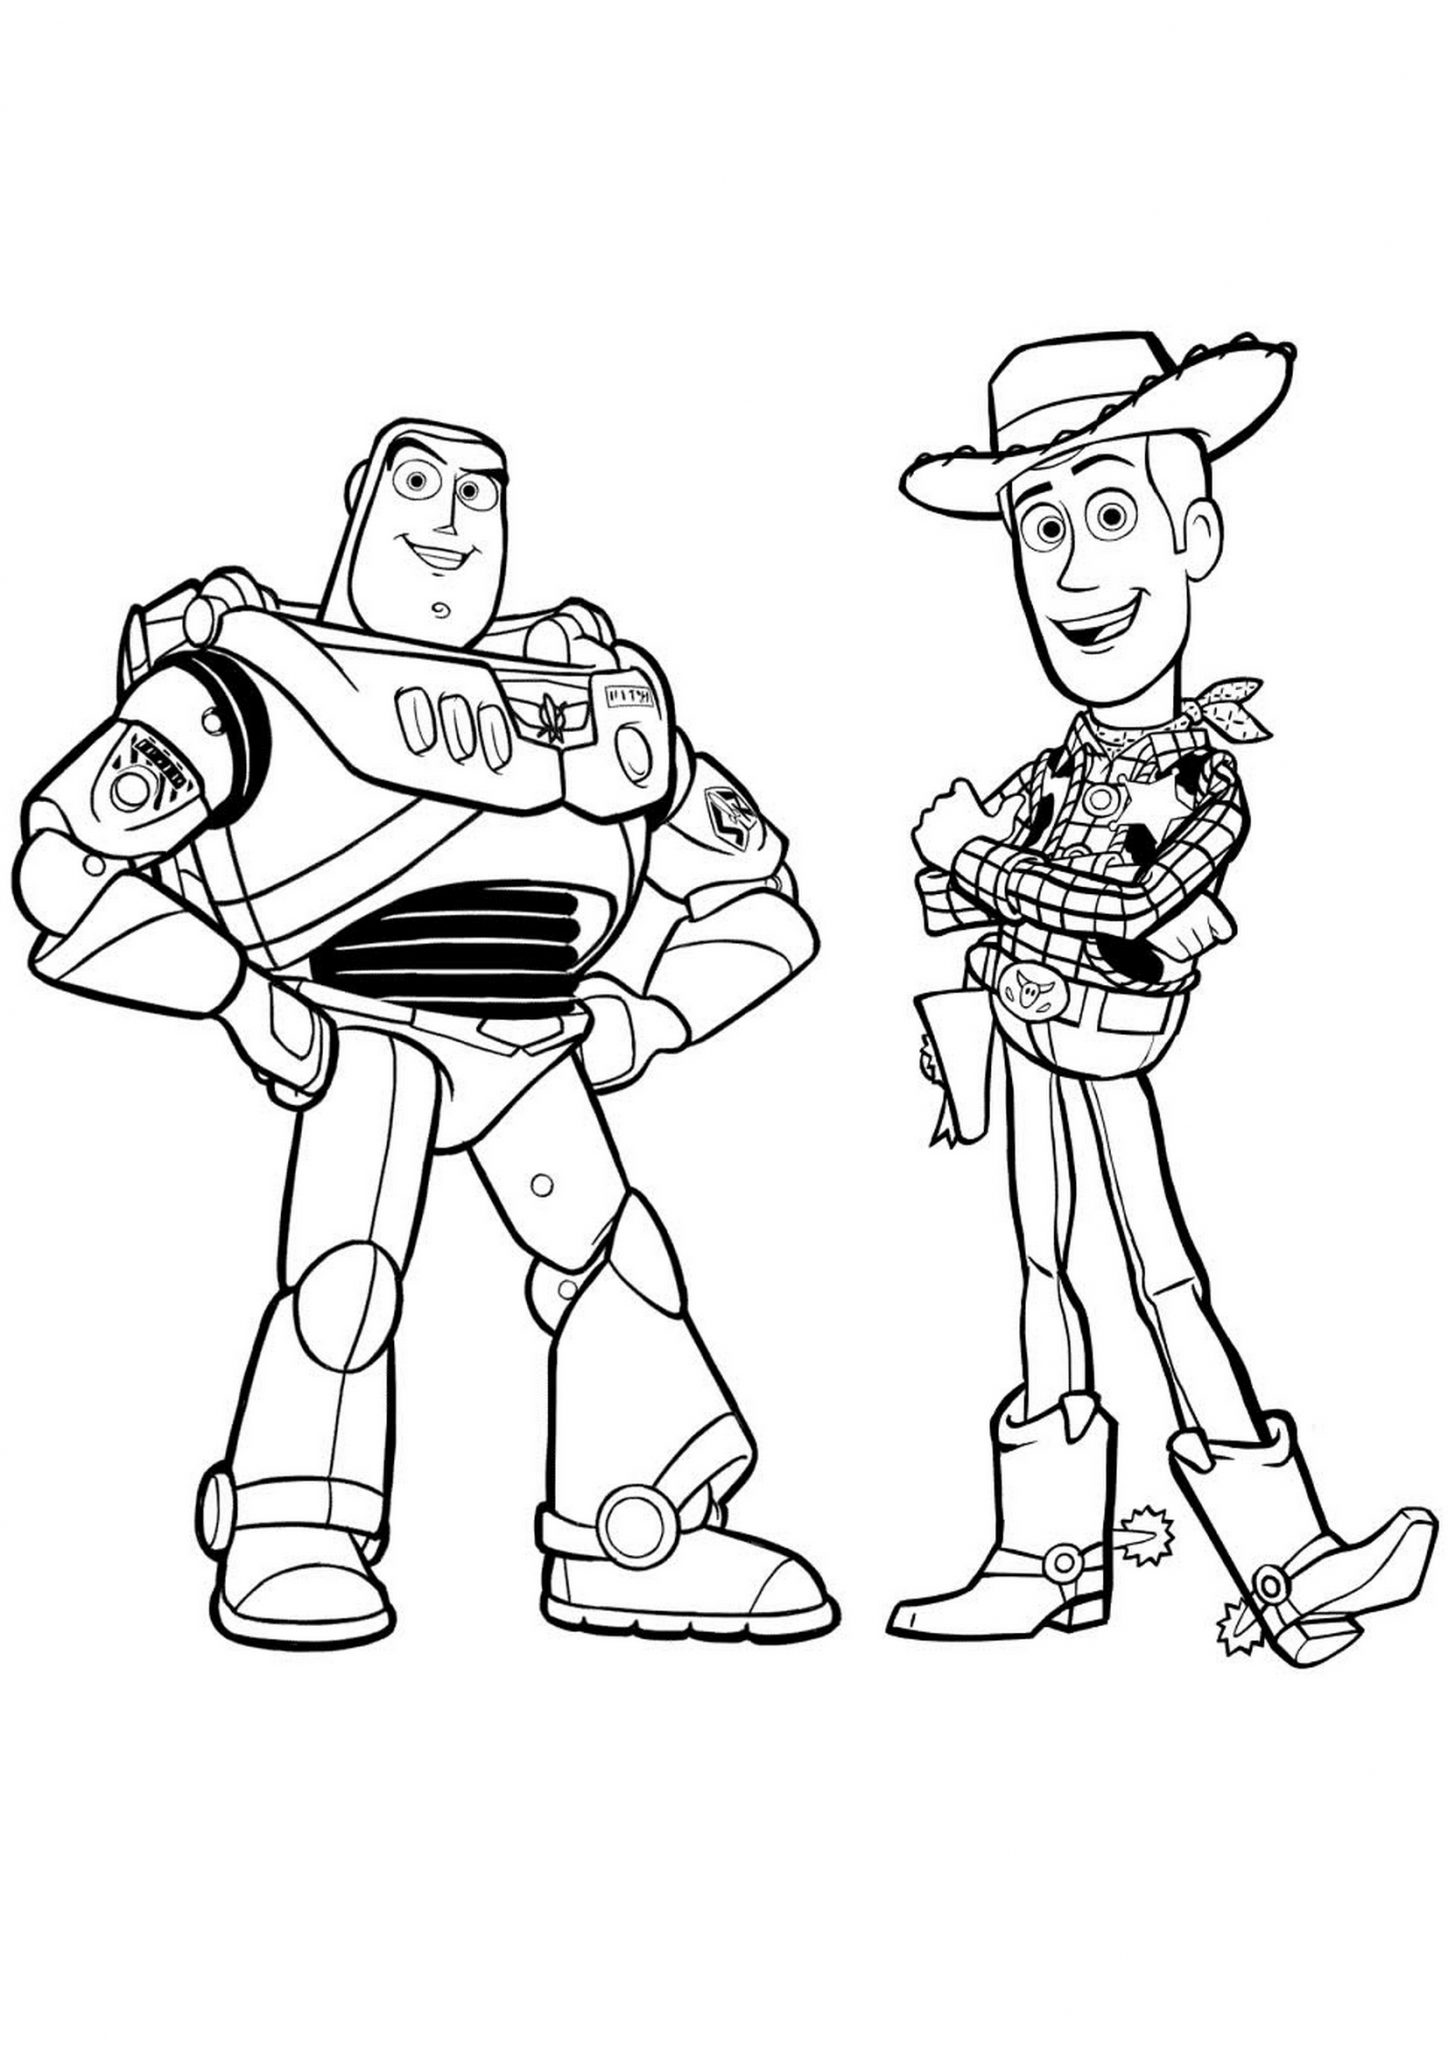 Coloriage Toy Story Coloriage Toy Story Pour Enfants | My XXX Hot Girl